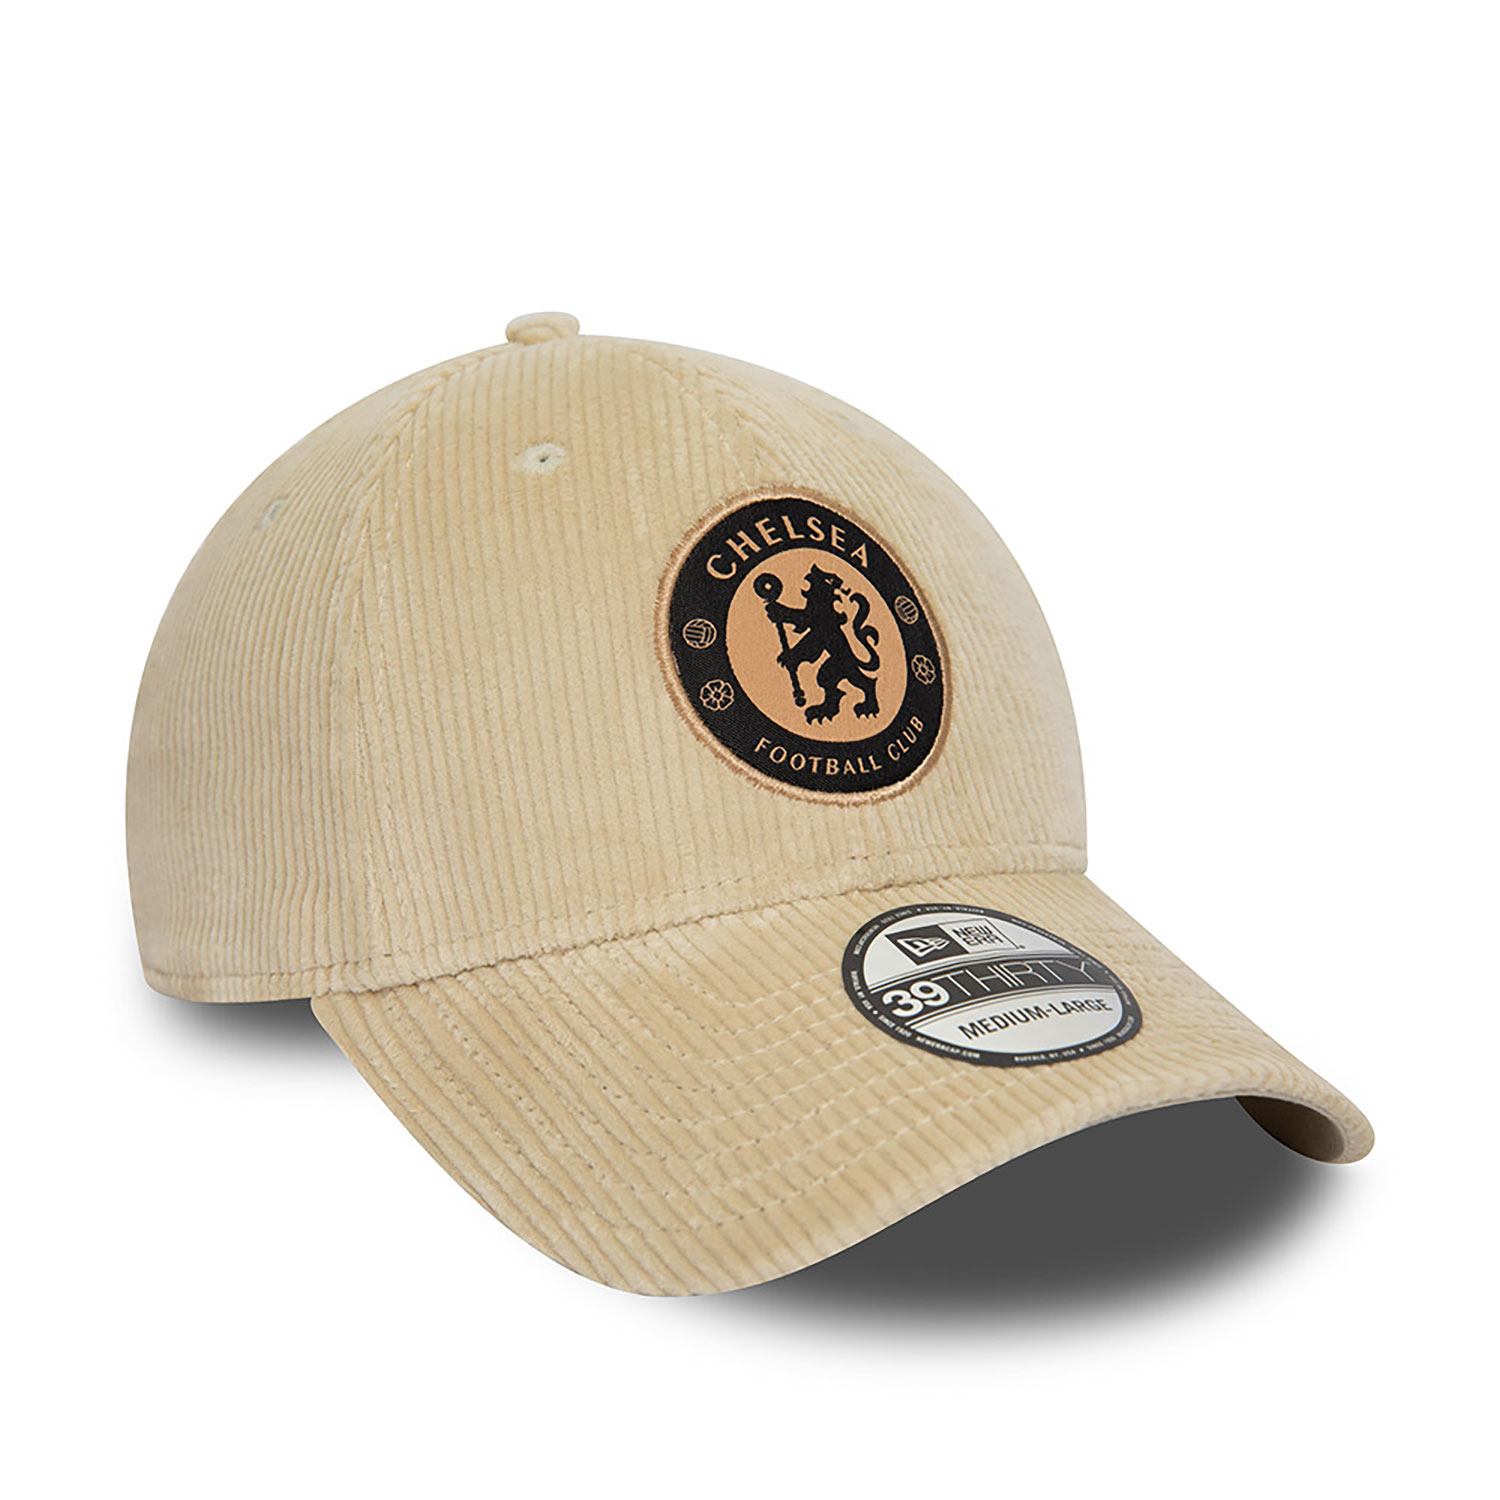 Chelsea FC Lion Crest Midcord Stone 39THIRTY Stretch Fit Cap